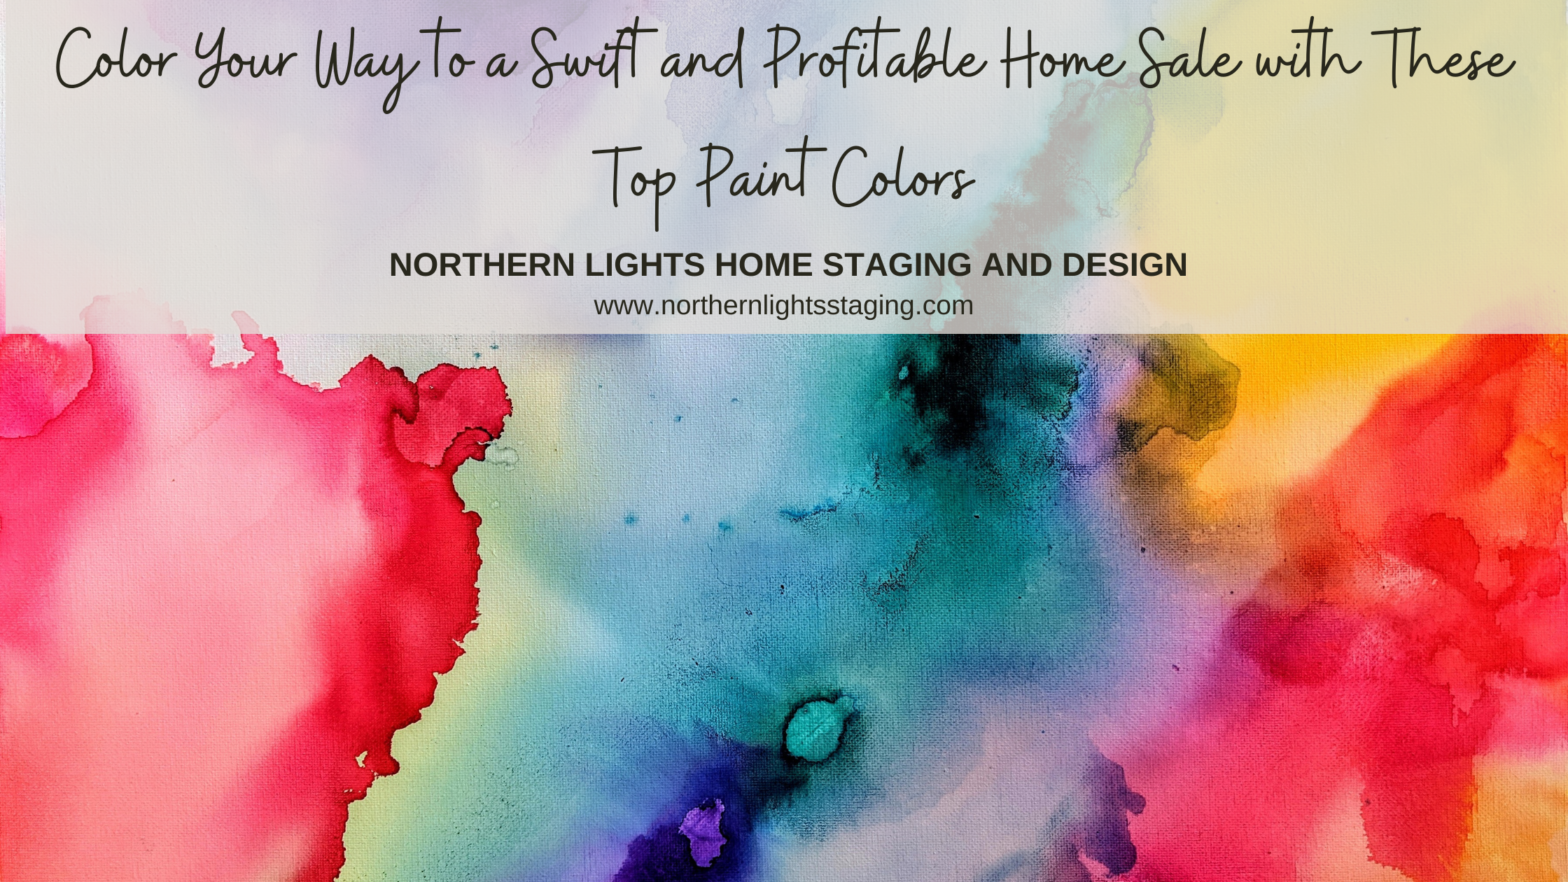 Color Your Way to a Swift and Profitable Home Sale with These Top Paint Colors